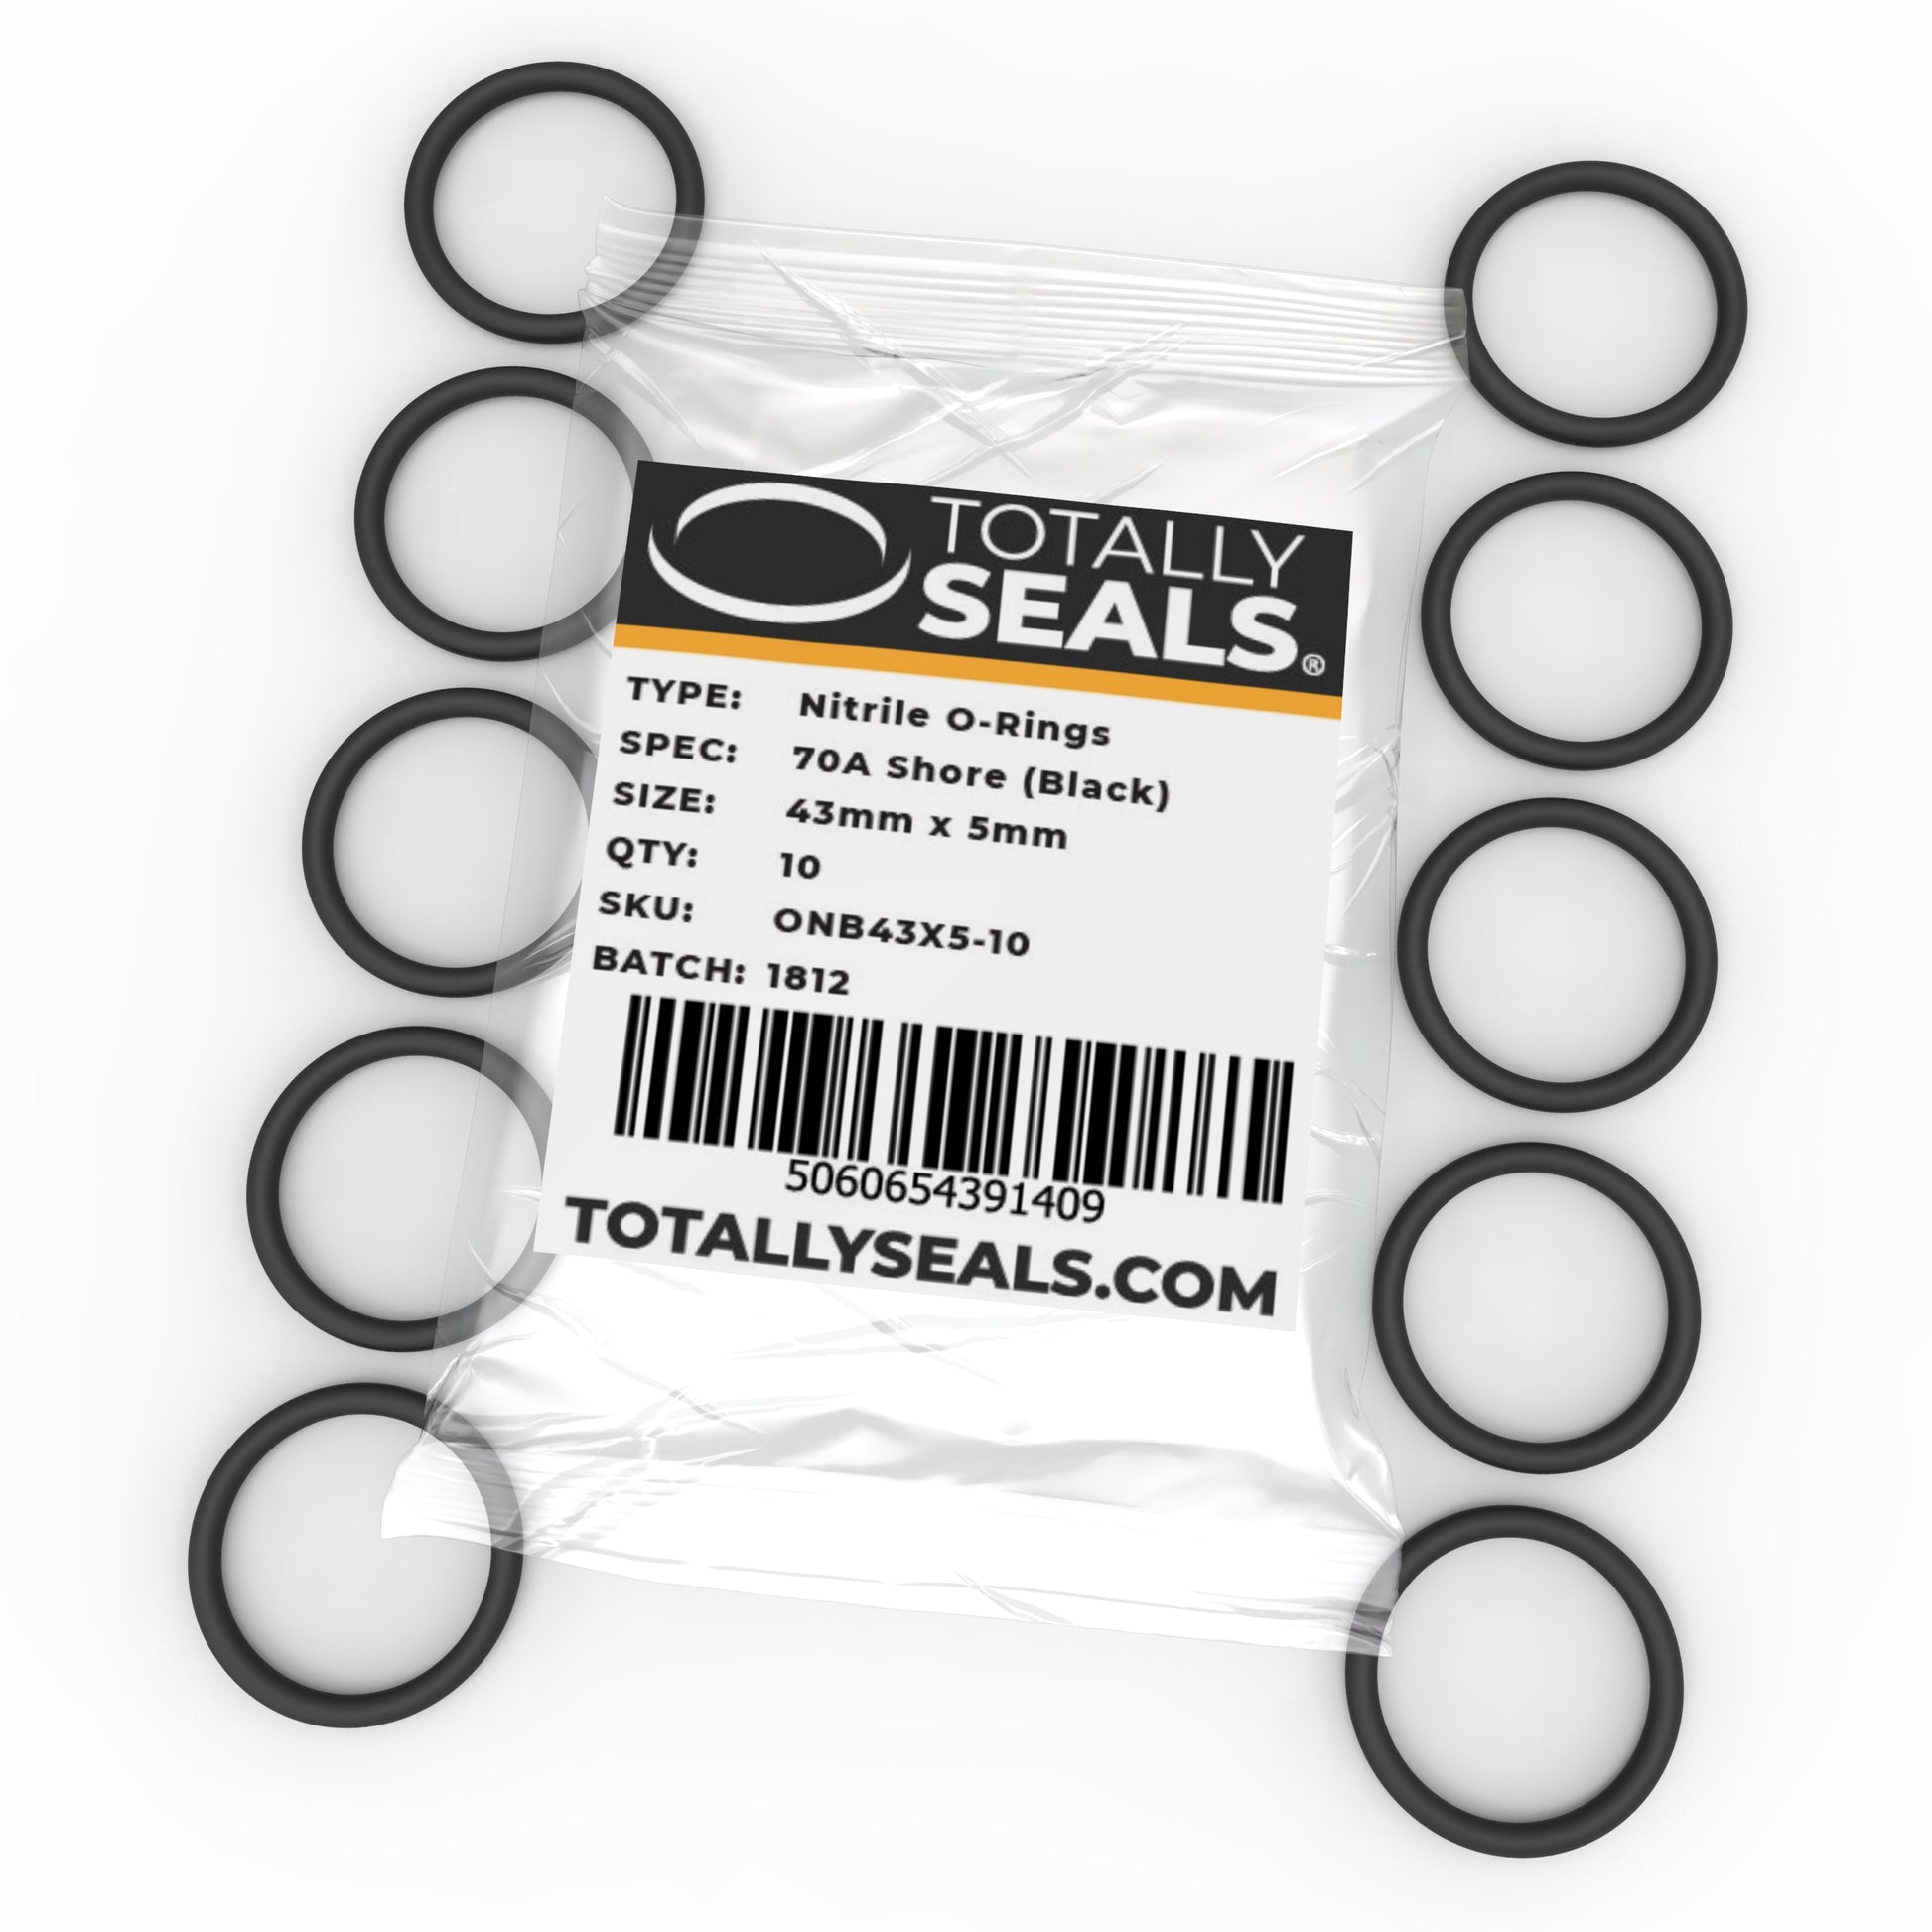 43mm x 5mm (53mm OD) Nitrile O-Rings - Totally Seals®